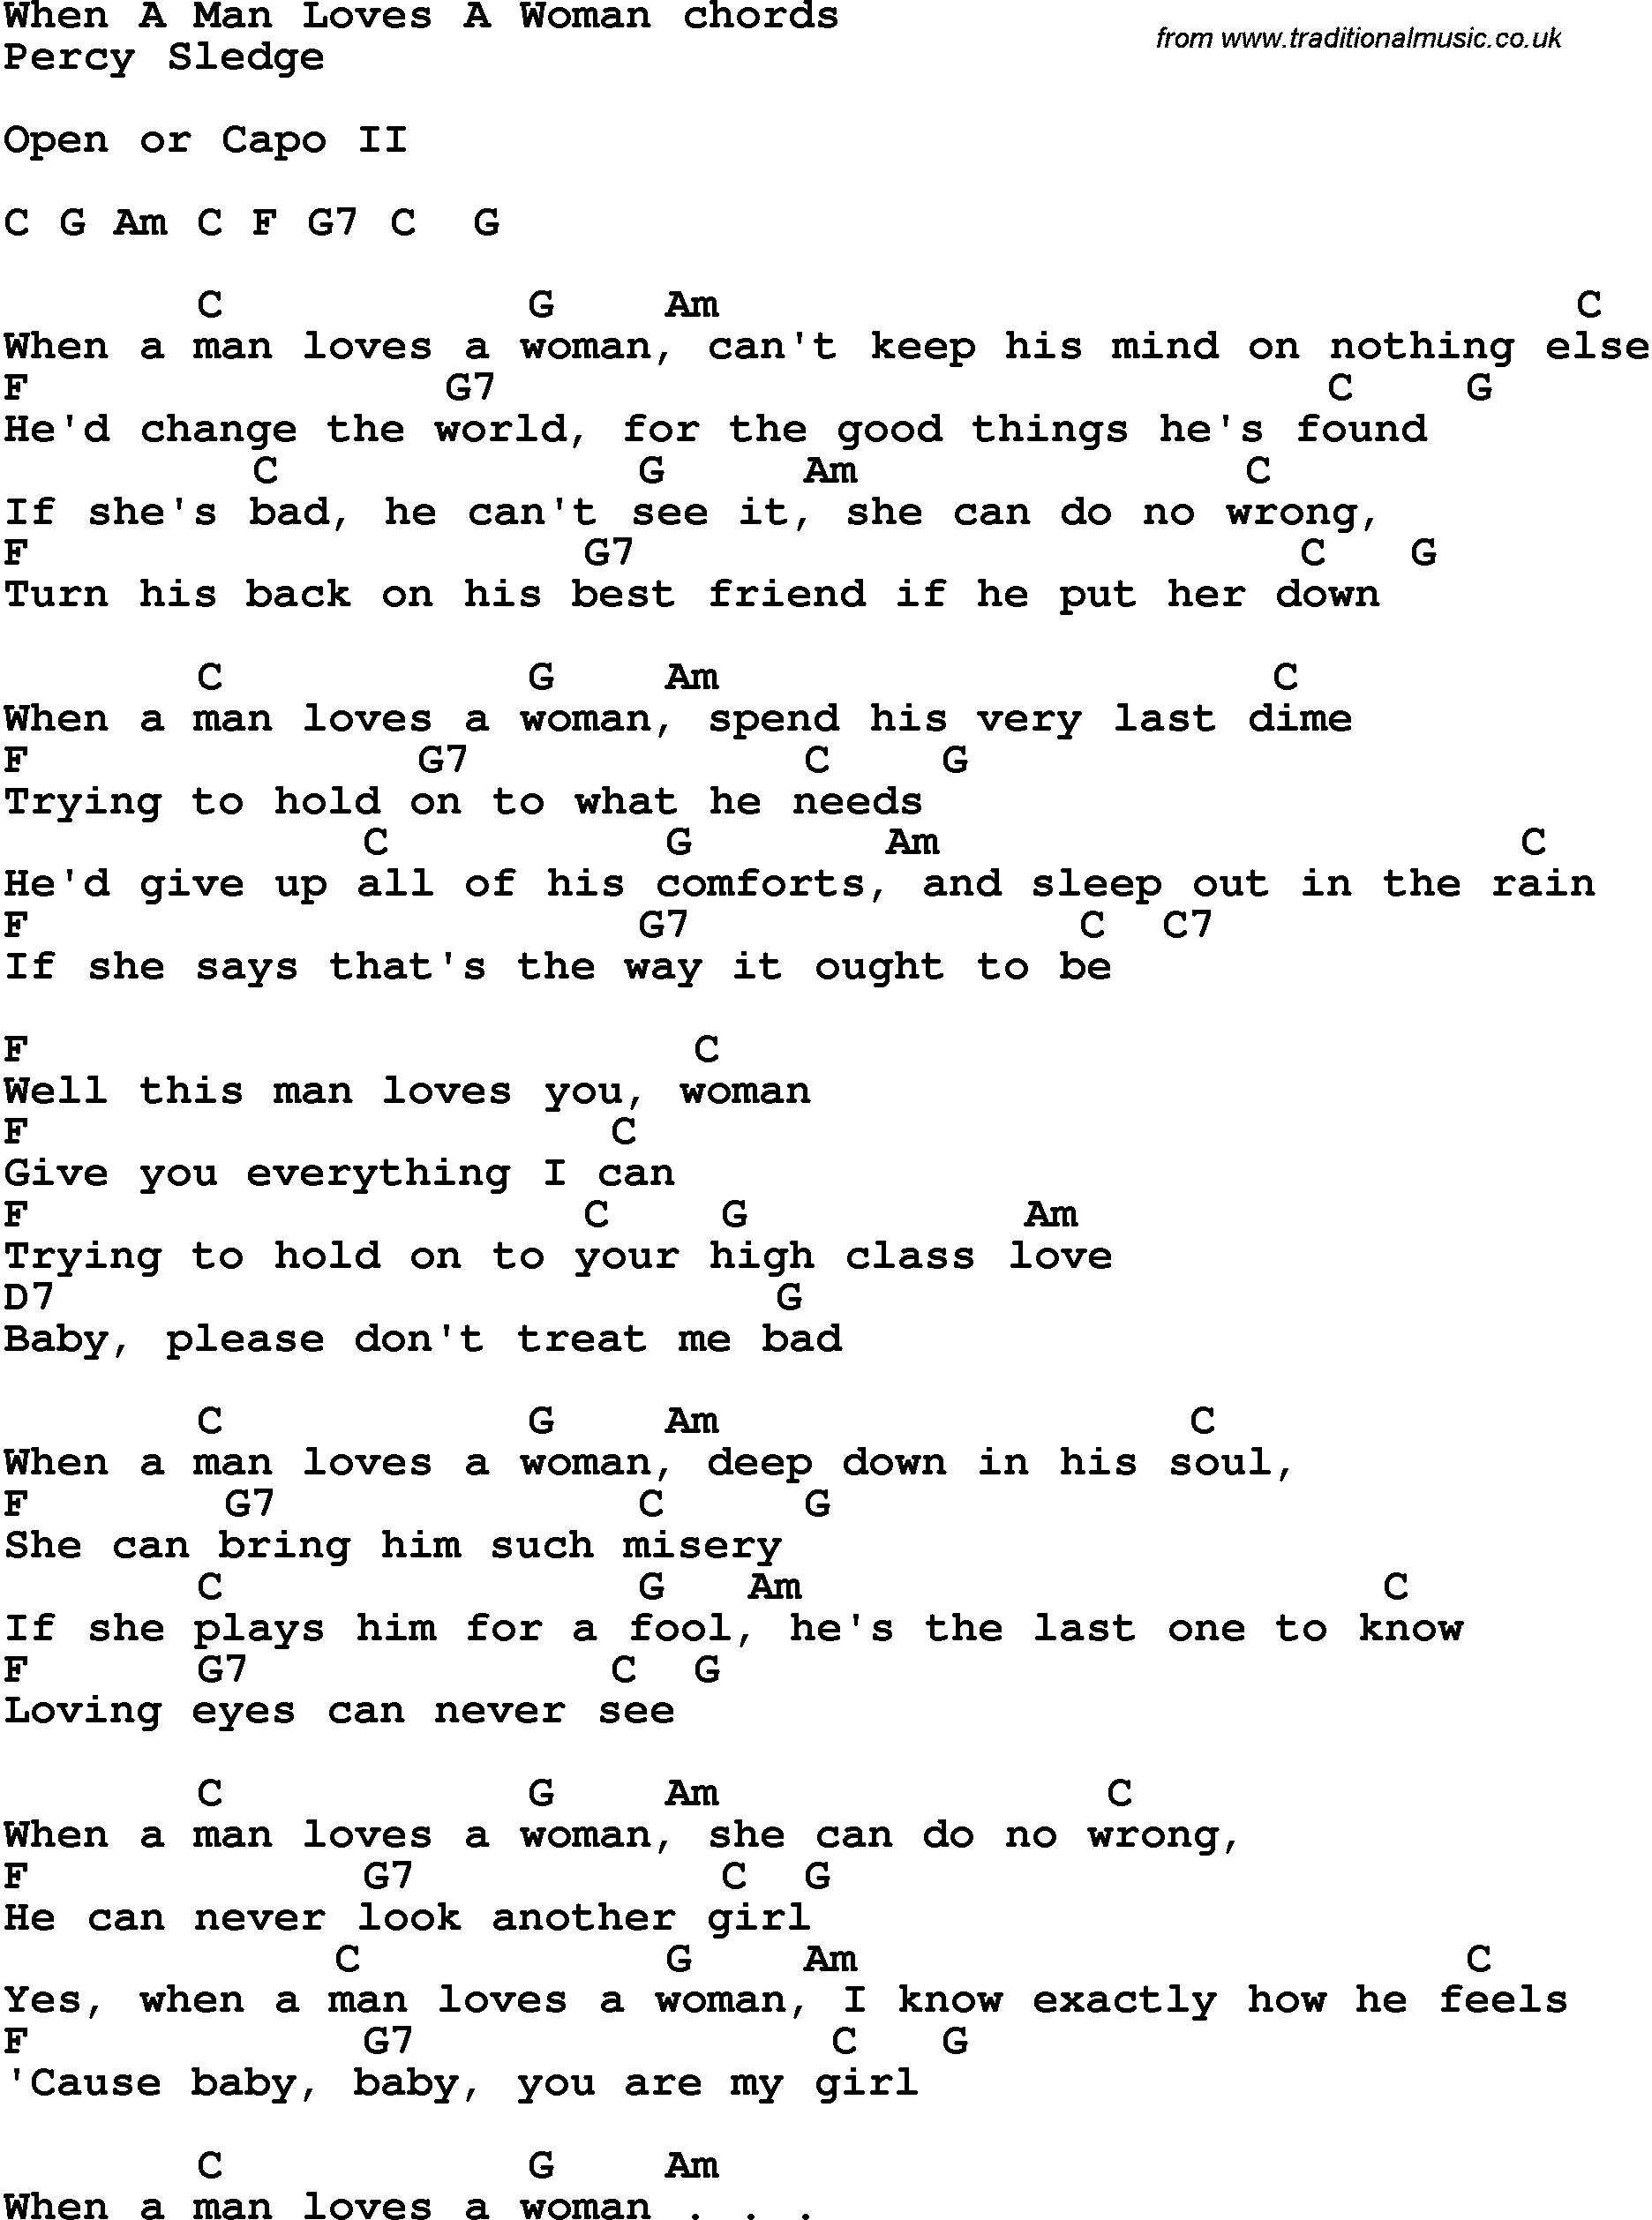 How He Loves Chords Song Lyrics With Guitar Chords For When A Man Loves A Woman